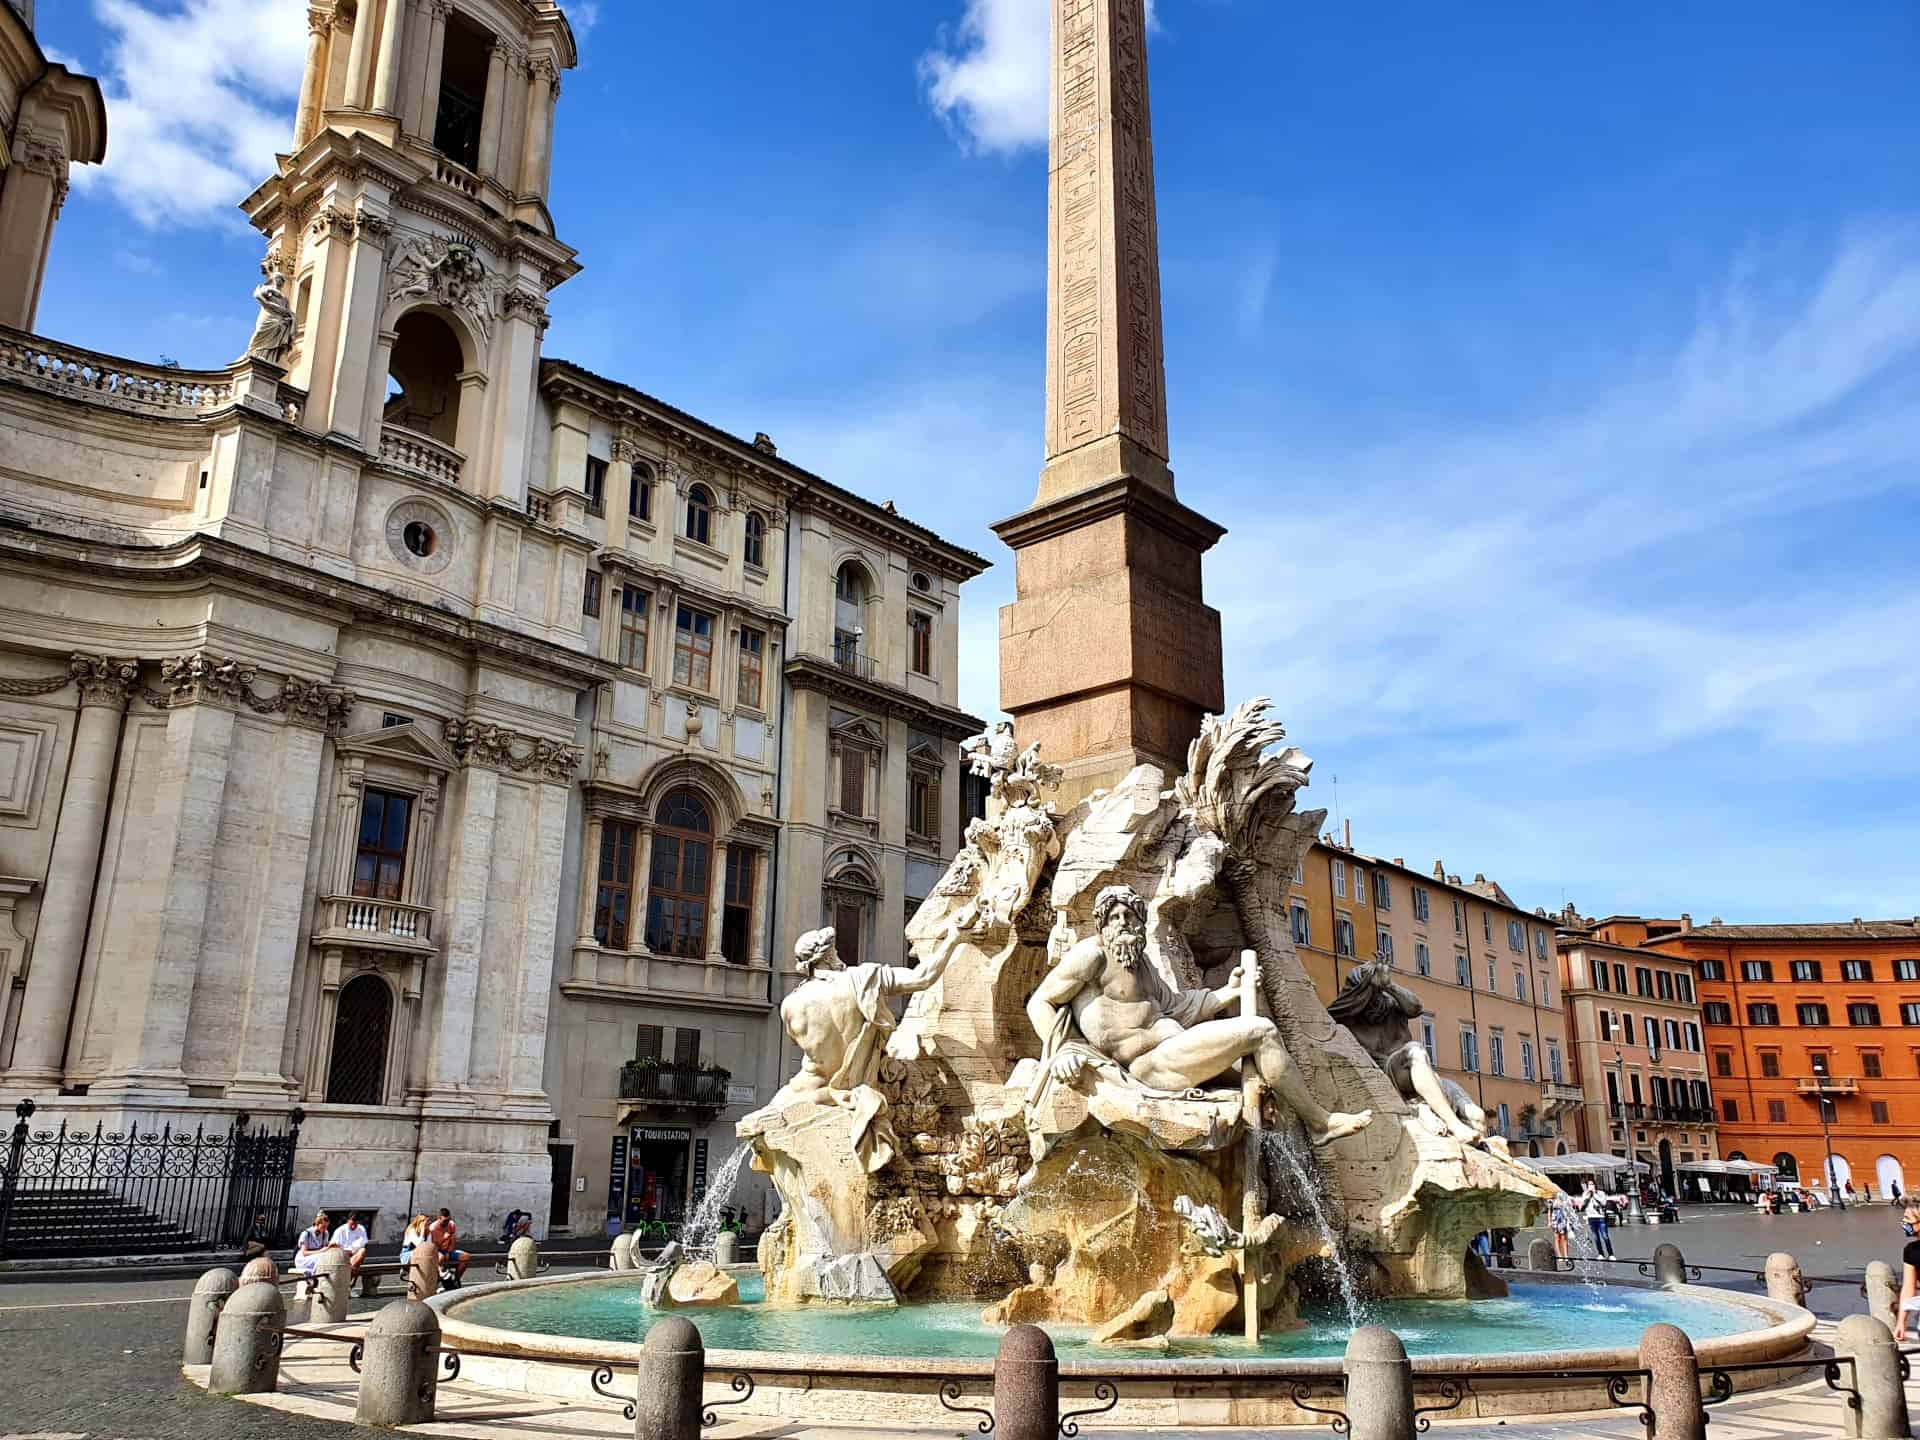 The Most Beautiful Squares and Fountains in Rome 4